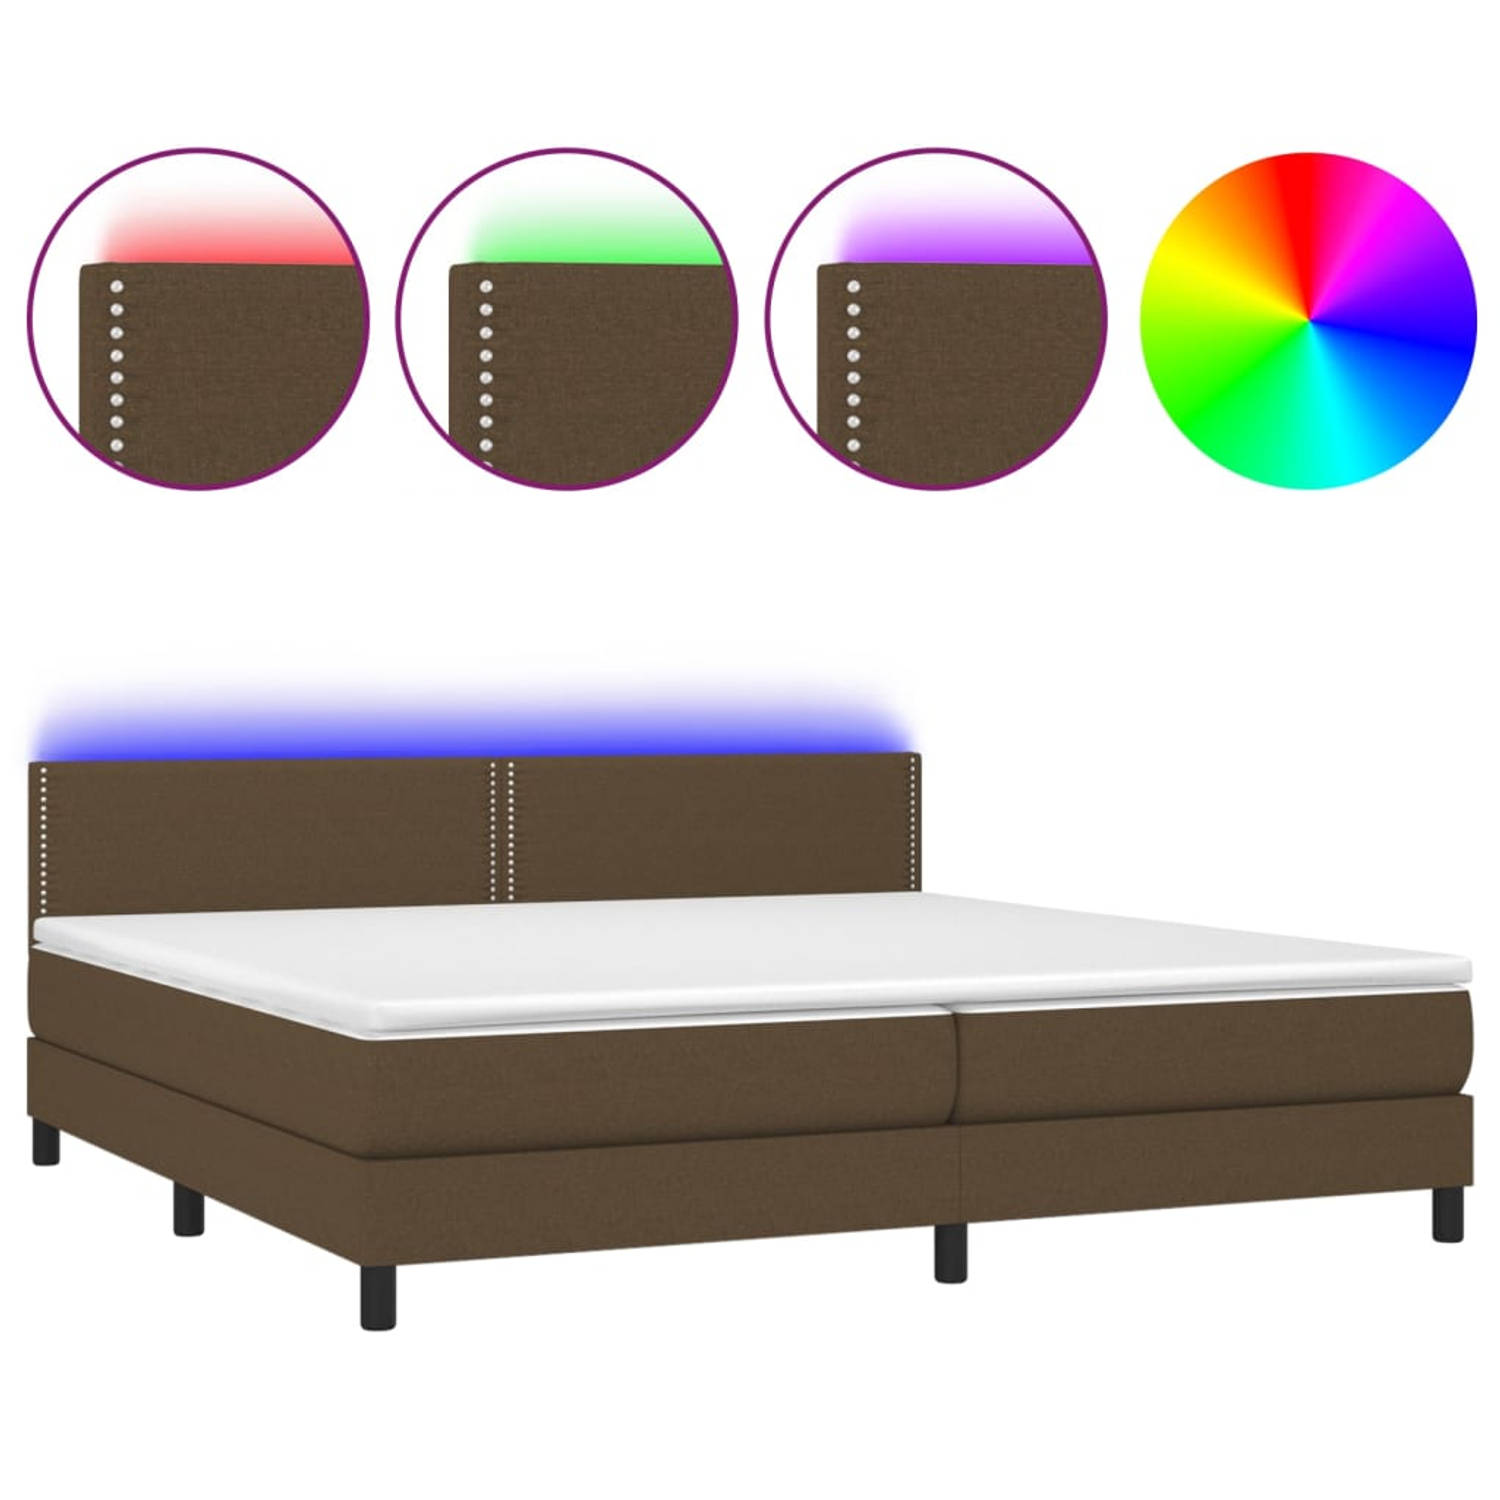 The Living Store Boxspring met matras en LED stof donkerbruin 200x200 cm - Boxspring - Boxsprings - Bed - Slaapmeubel - Boxspringbed - Boxspring Bed - Tweepersoonsbed - Bed Met Mat